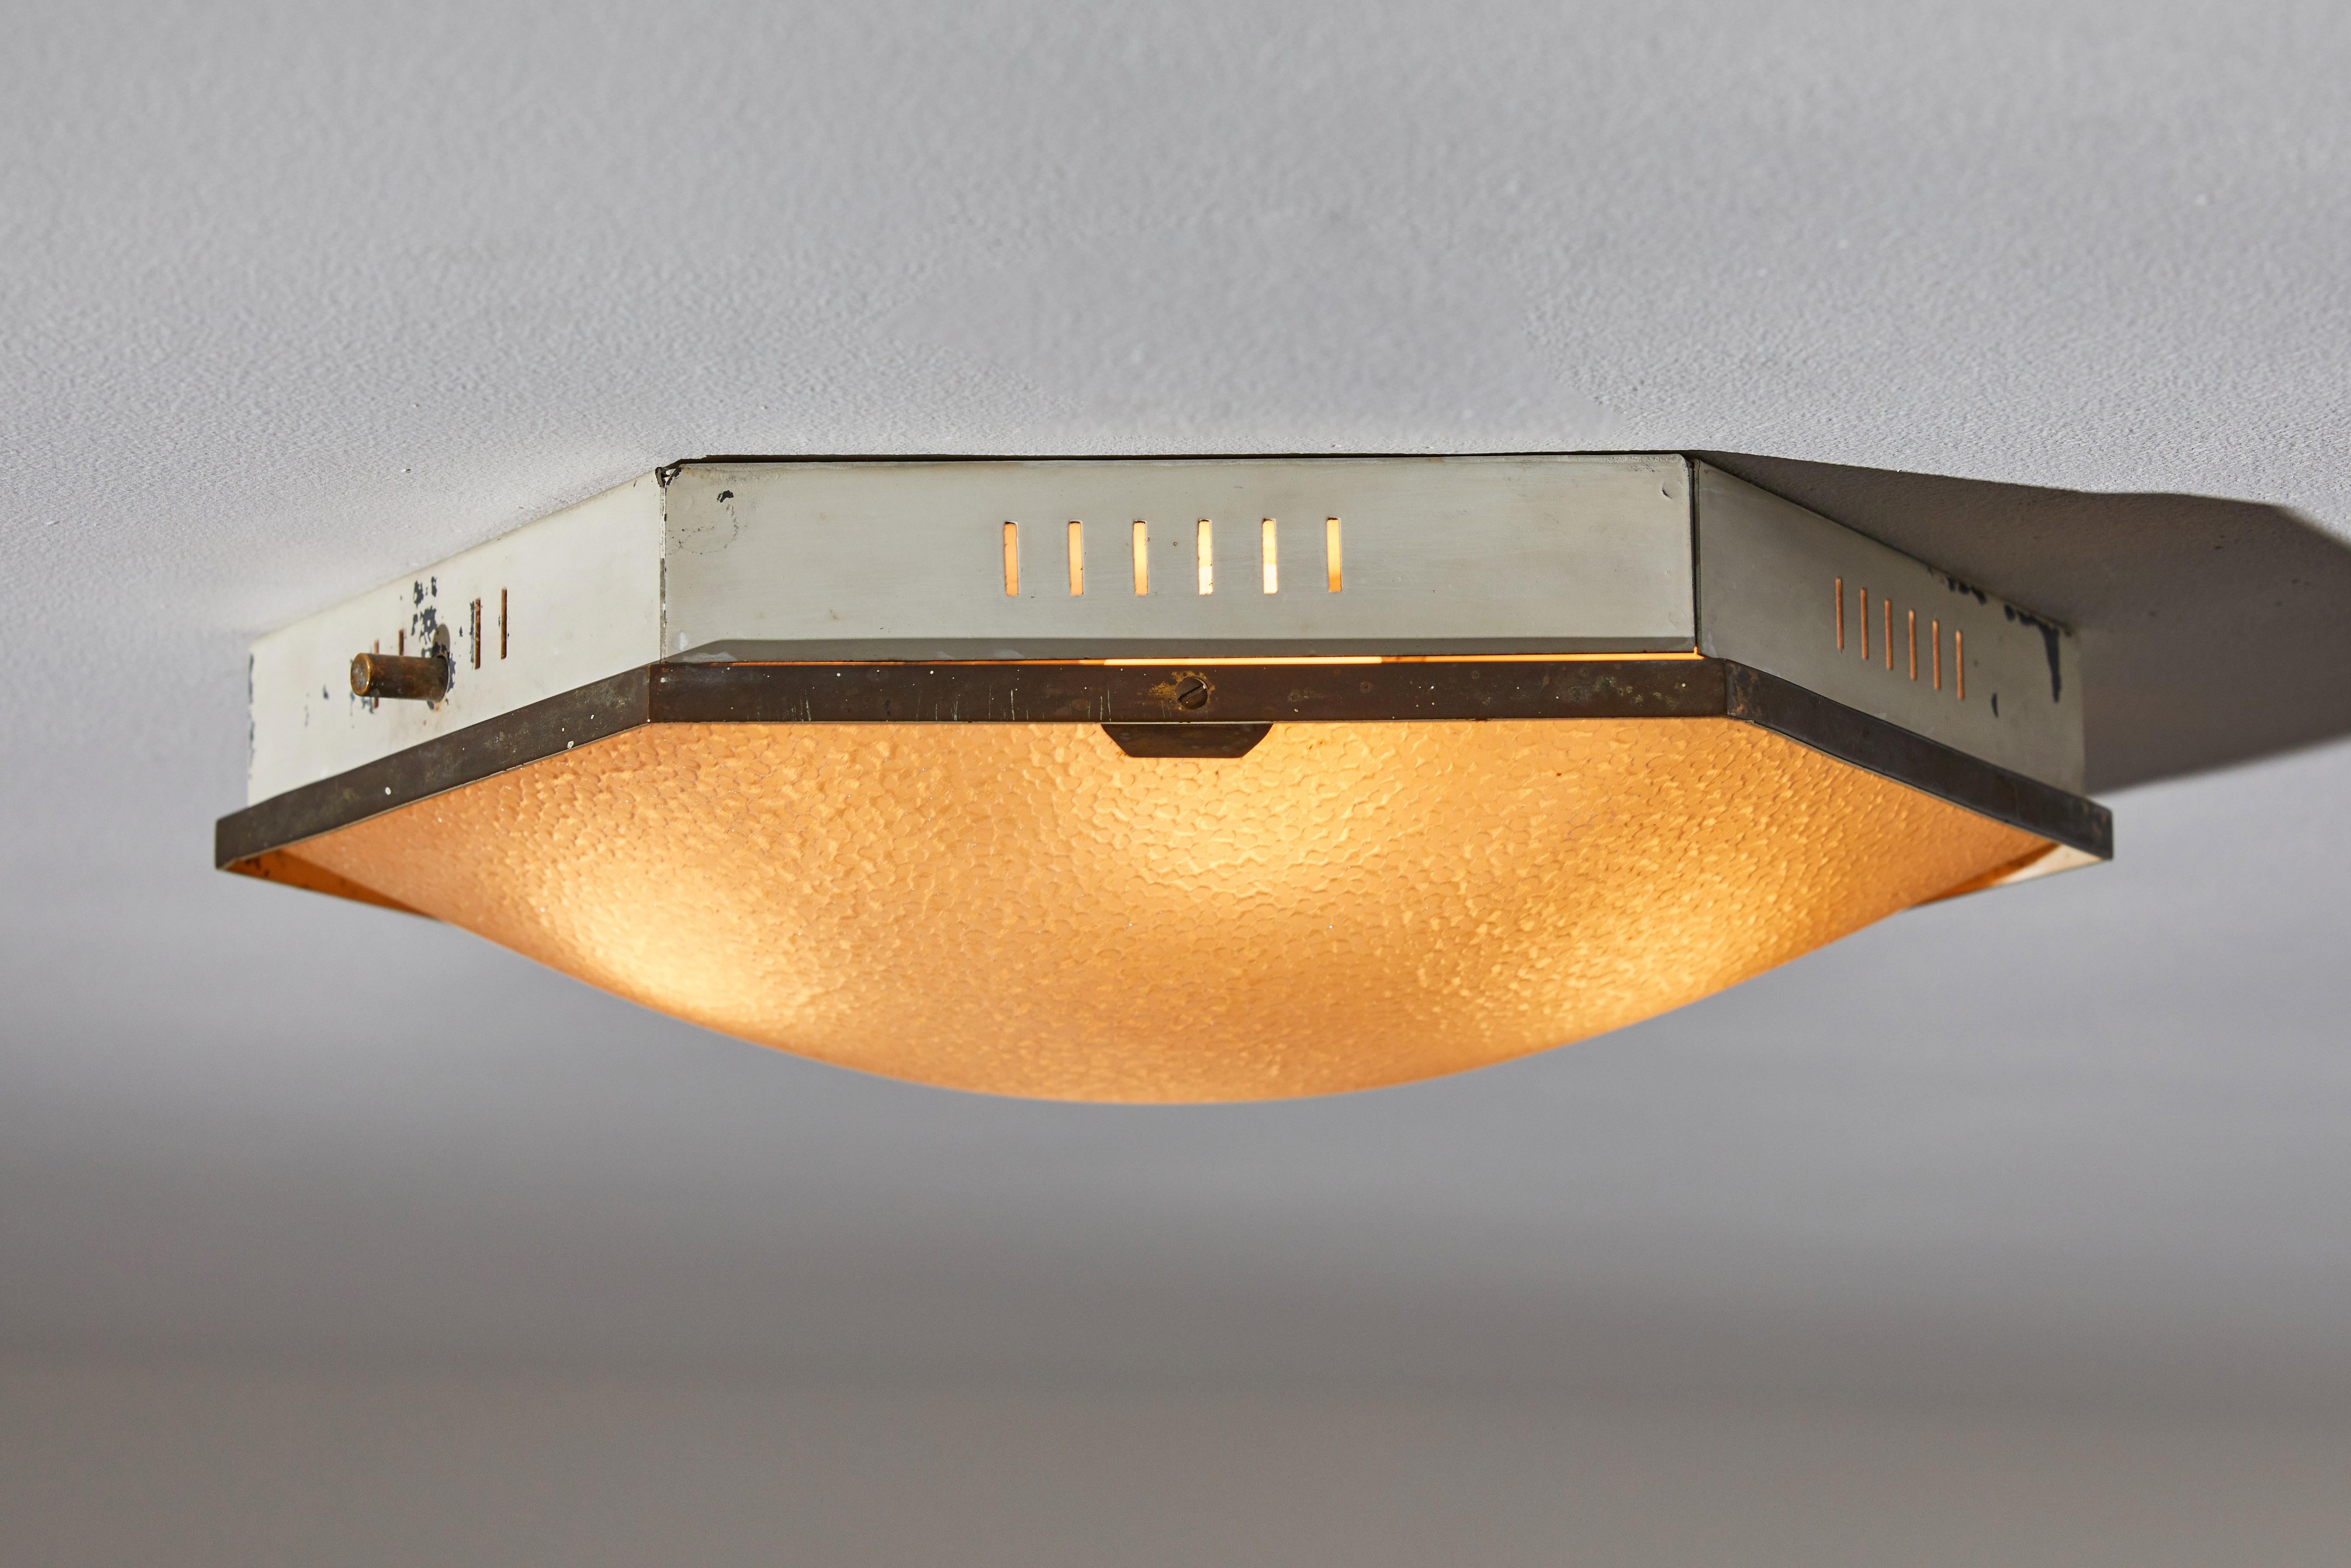 Flush mount ceiling Light by Stilnovo. Manufactured in Italy, circa 1950s. Enameled metal, bras textured glass. Rewired for U.S. junction boxes. Retains part of manufacturer's label. Bulbs provided as a onetime courtesy.